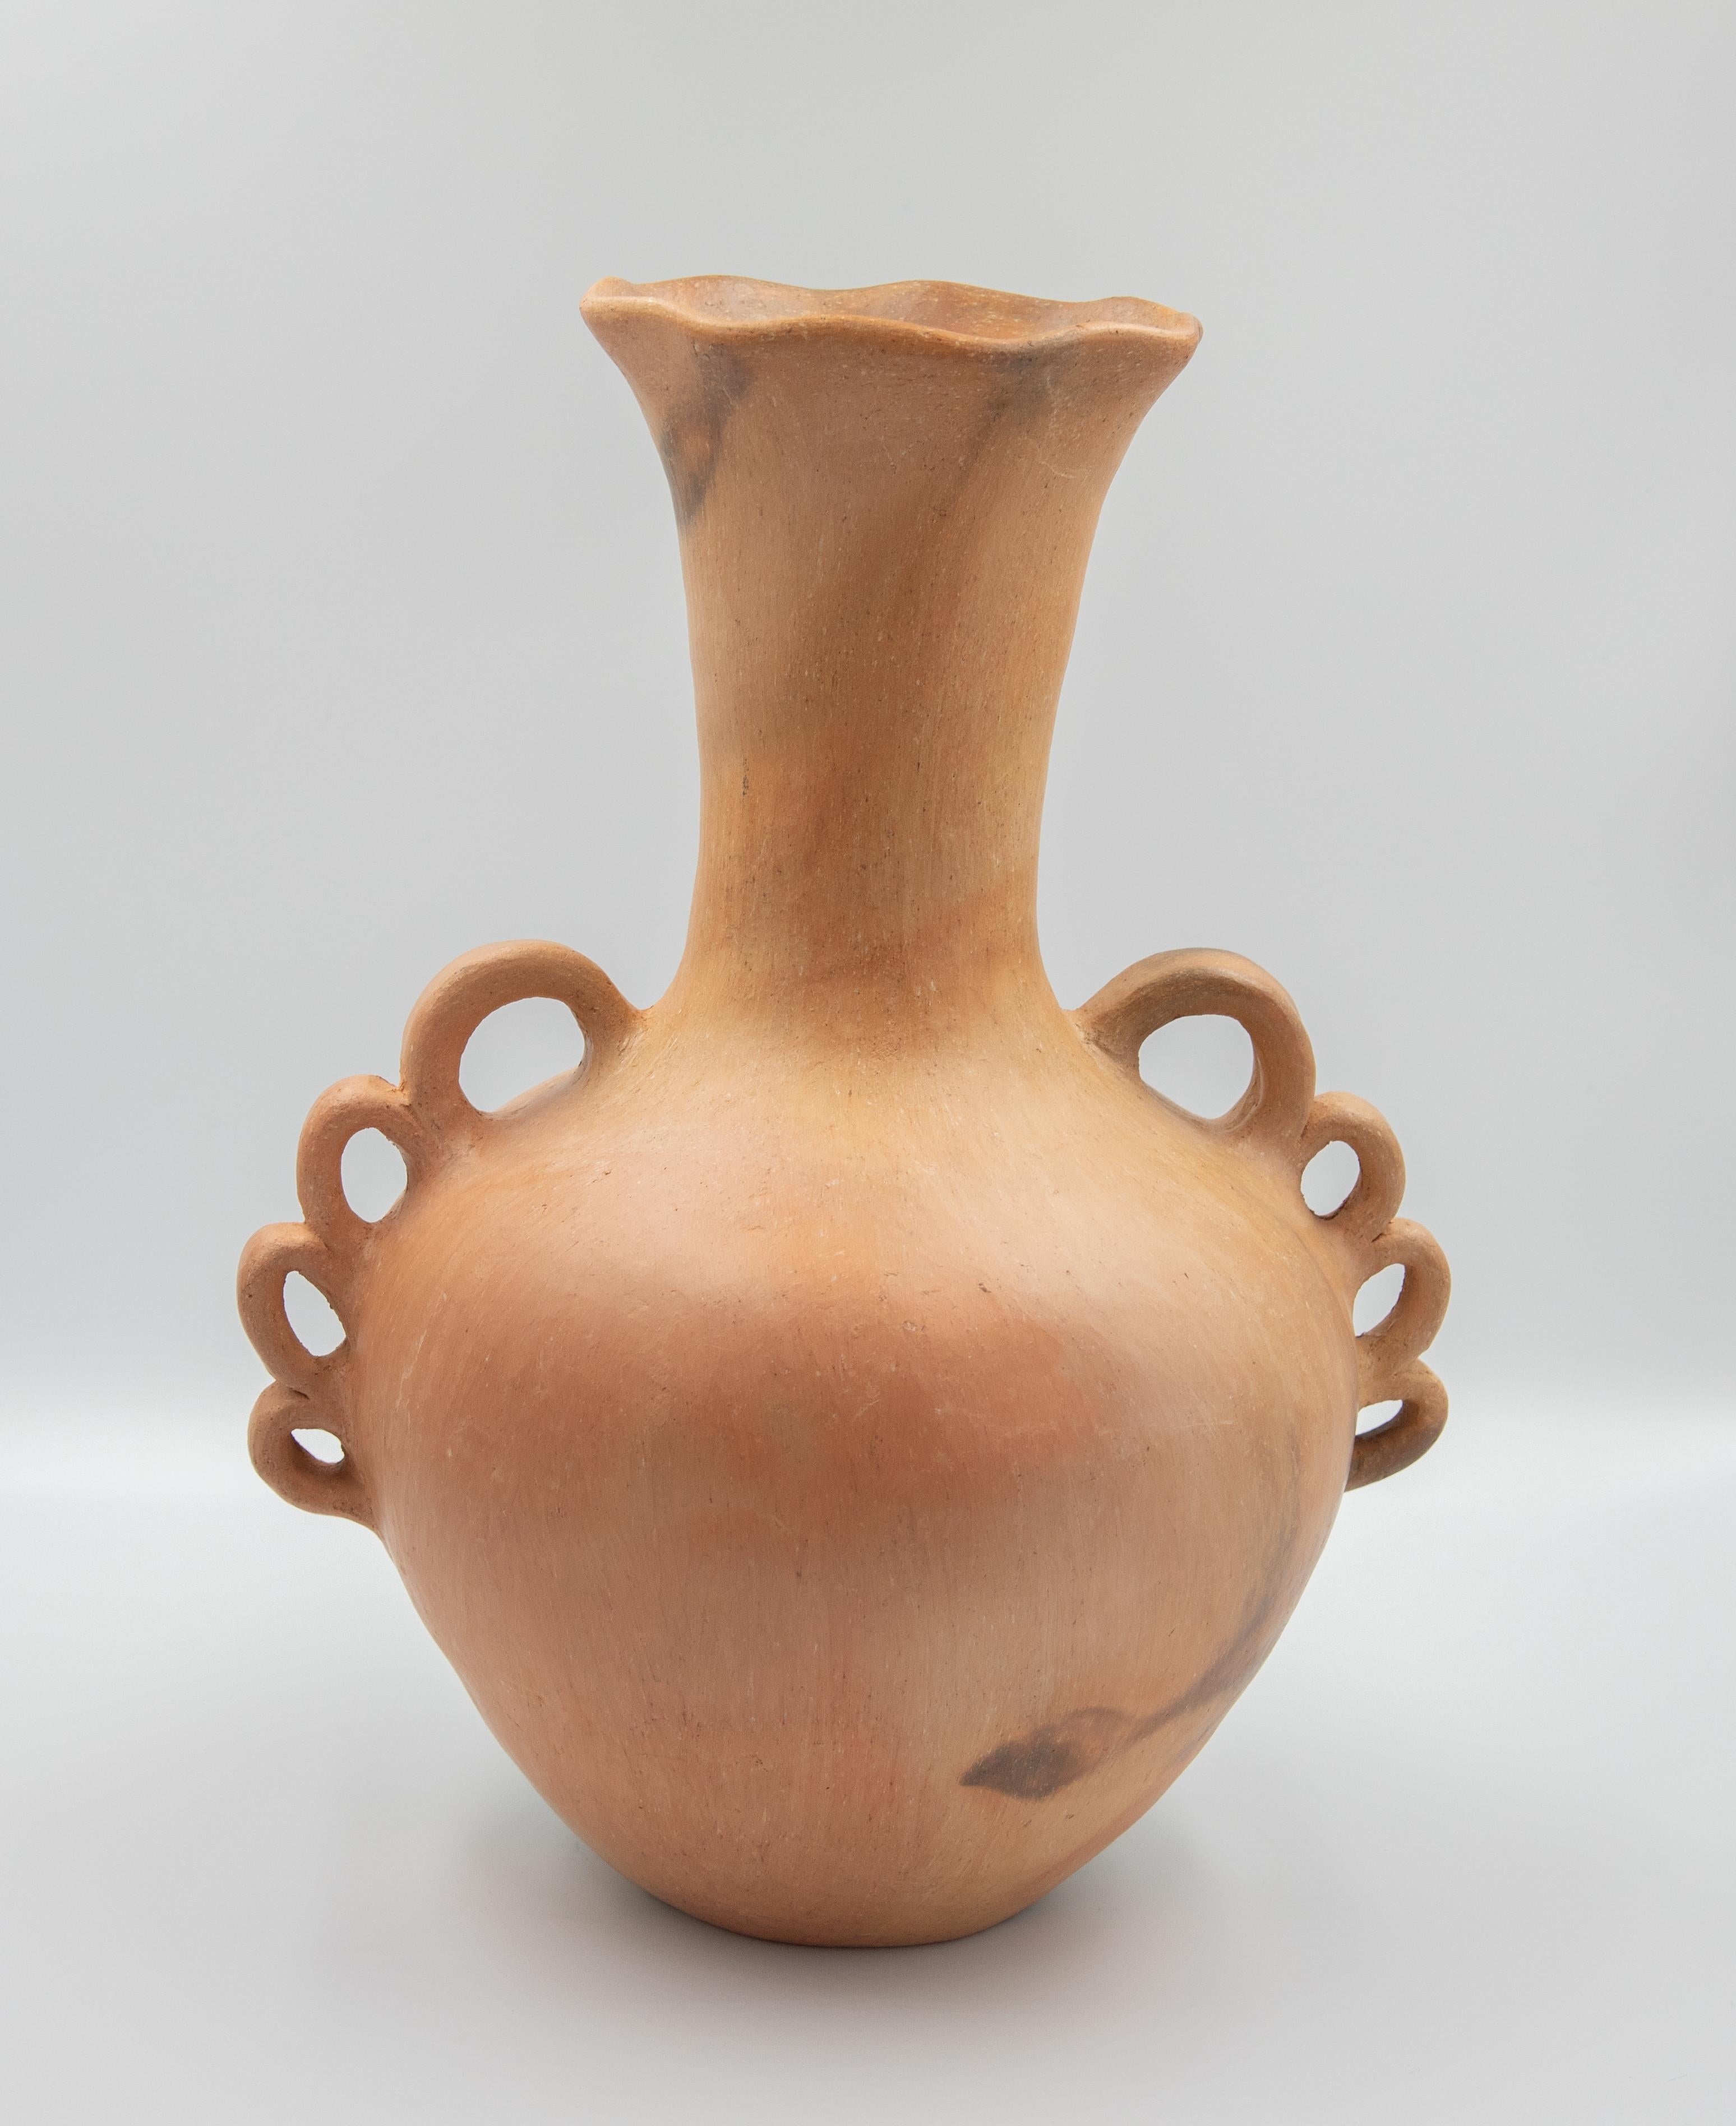 Hand-Crafted Mexican Rustic Natural Clay Folk Art Handmade Ceramic Vase Terracota